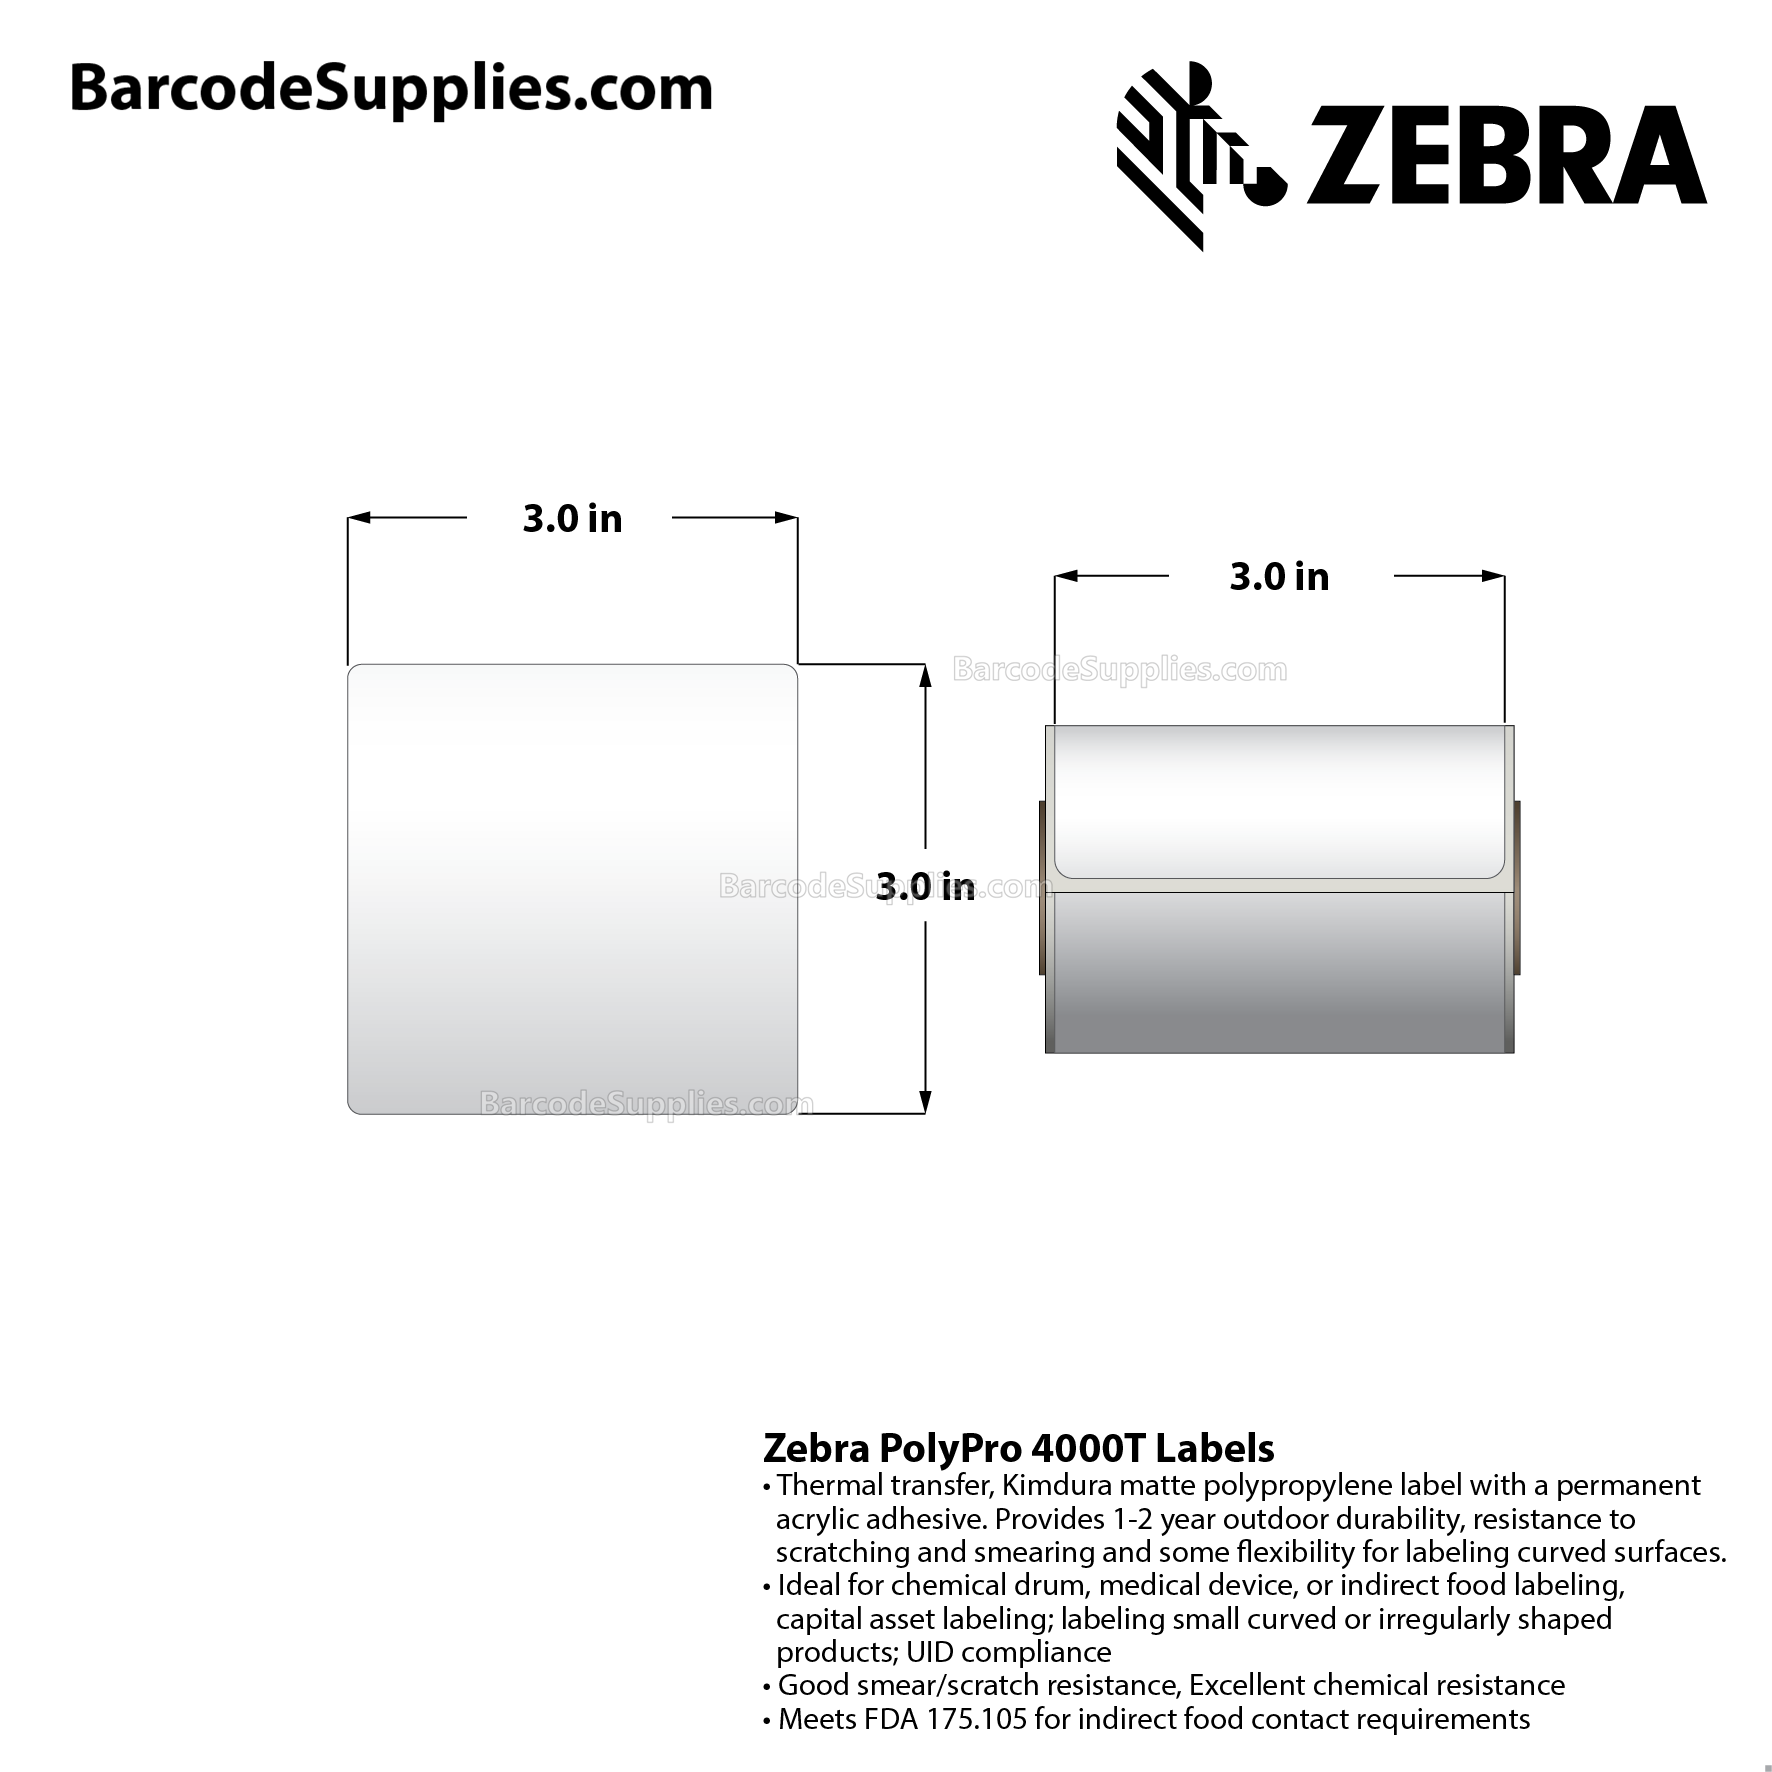 3 x 3 Thermal Transfer White PolyPro 4000T Labels With Permanent Adhesive - Not Perforated - 90 Labels Per Roll - Carton Of 12 Rolls - 1080 Labels Total - MPN: 82413